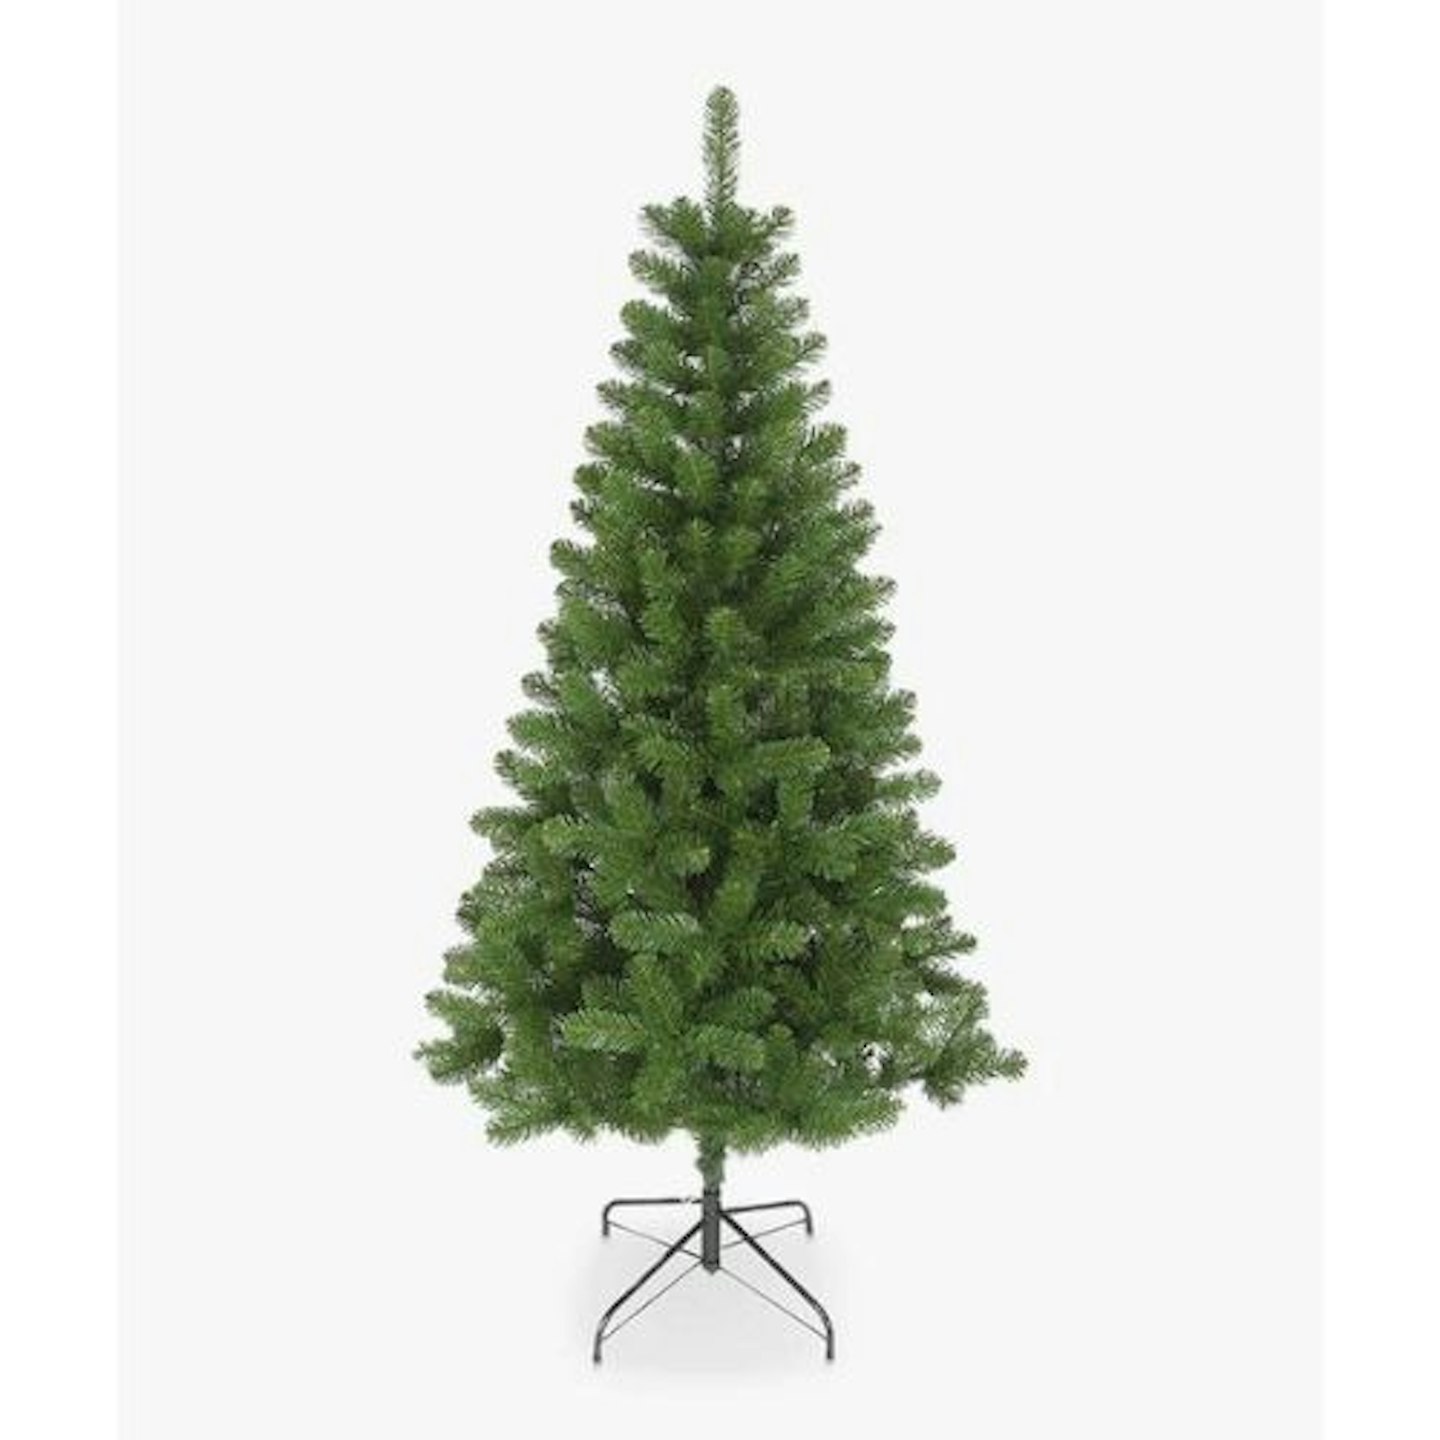 Best artificial Christmas trees John Lewis Traditions Unlit Christmas Tree, 6ft